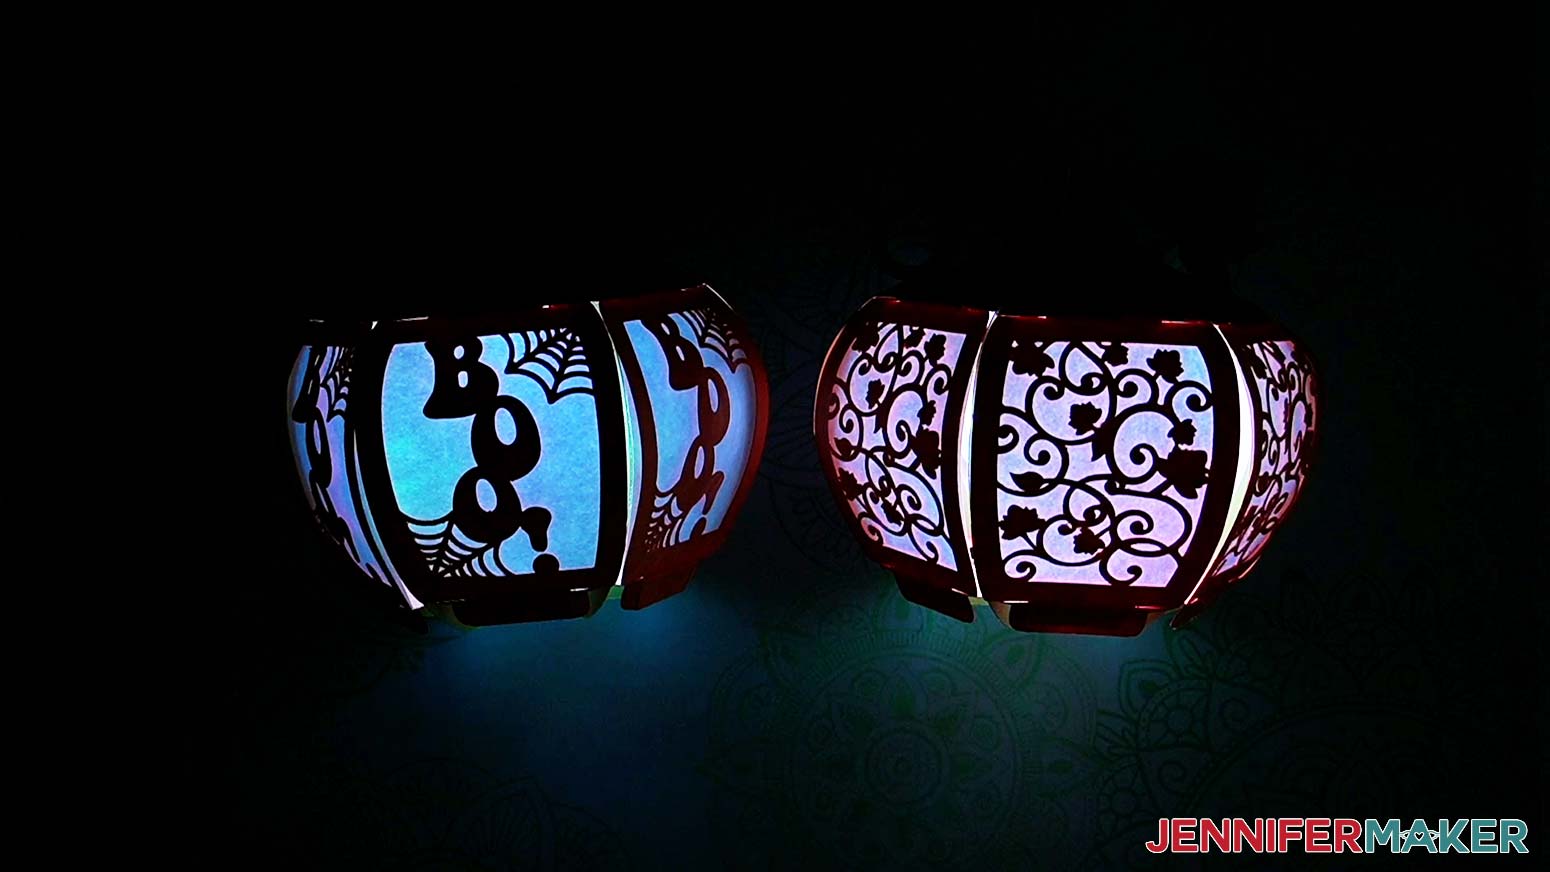 Fully assembled and lit 3D pumpkin lanterns with "boo!" and leaf pattern panels